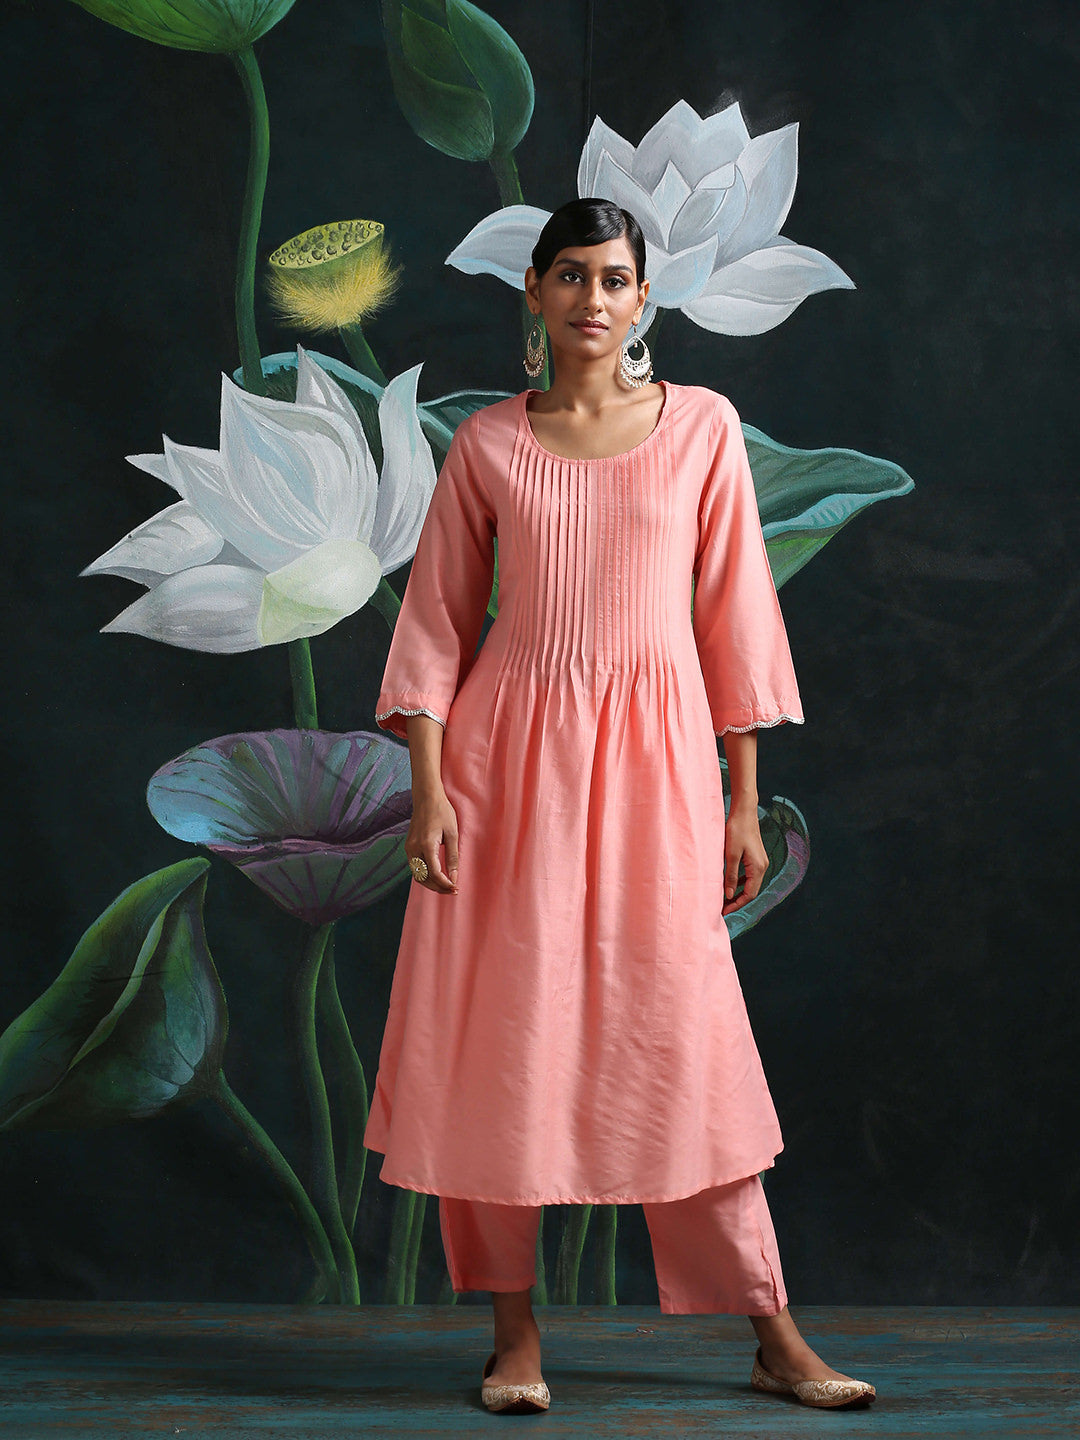 Cotton silk pleated flared kurta with detailed sleeves and pockets